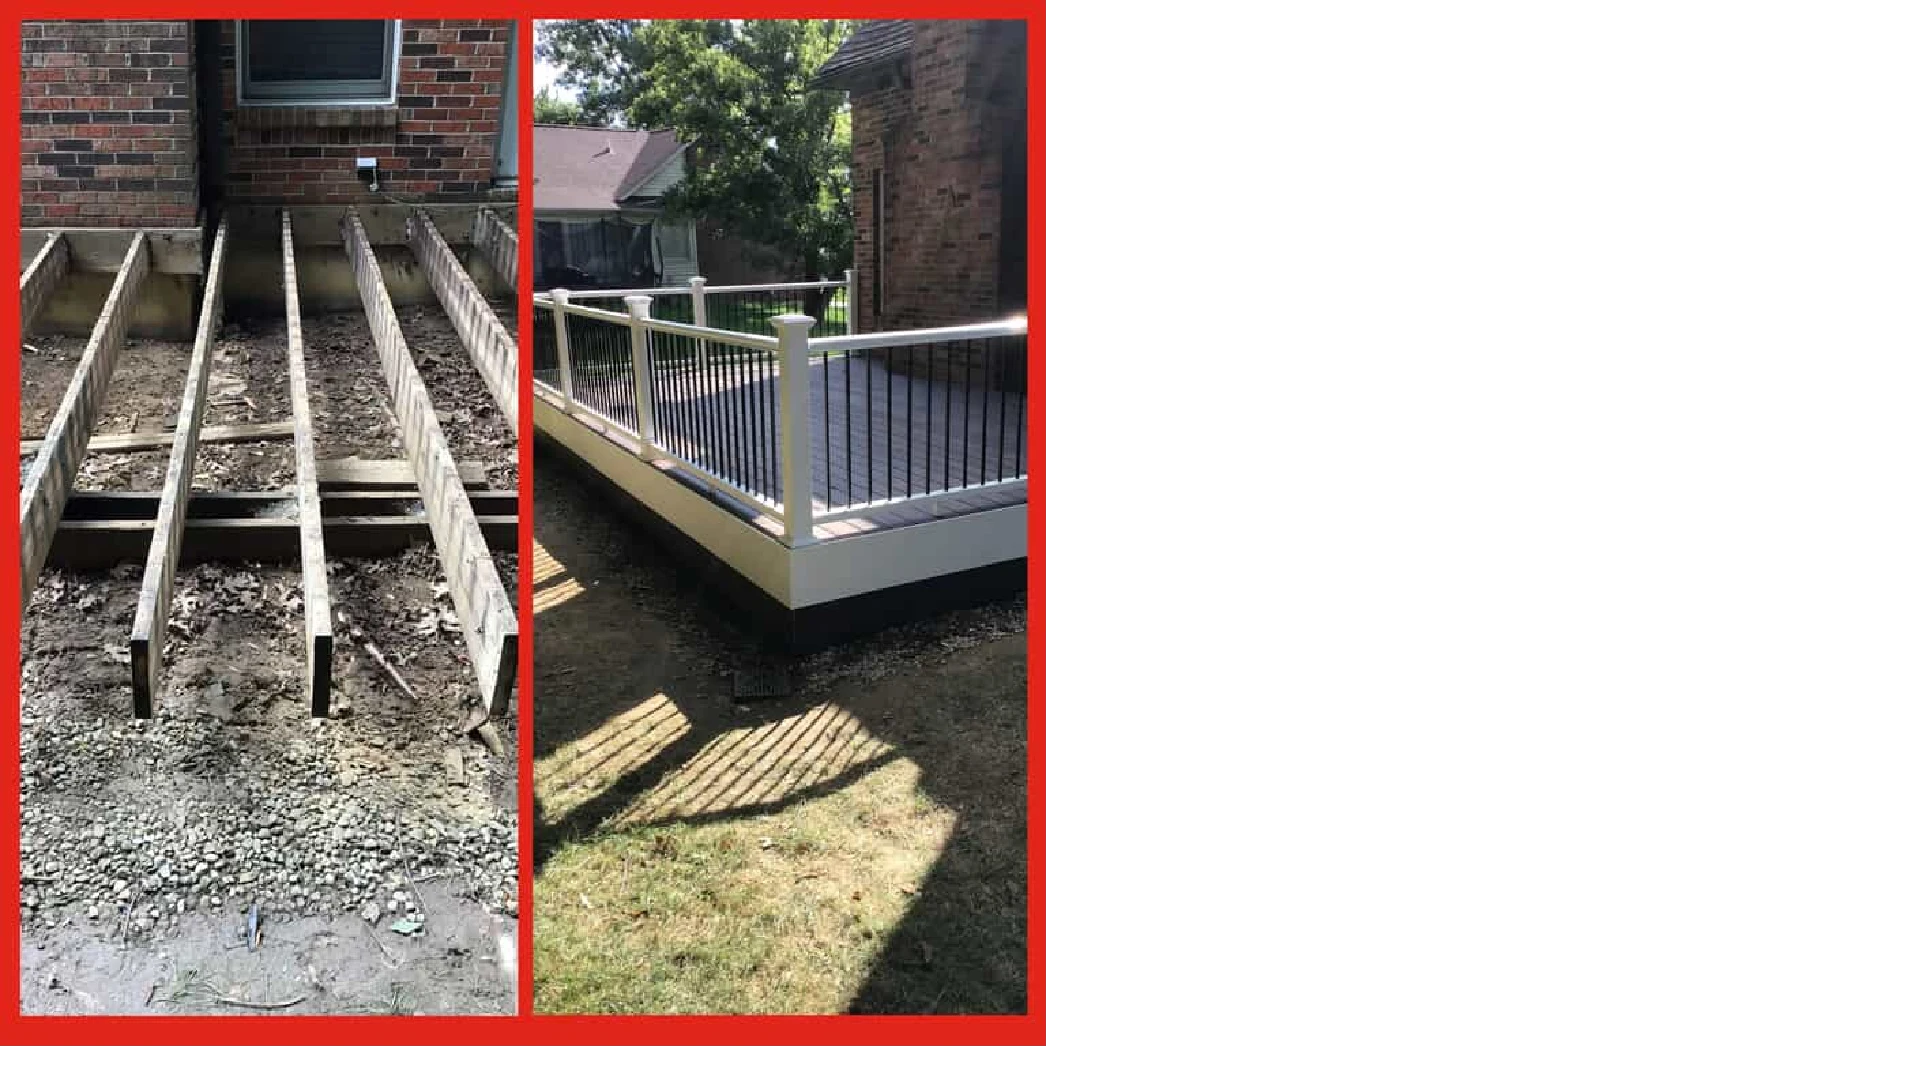 Images of the early and final stages of a deck installation project completed by Mr. Handyman.